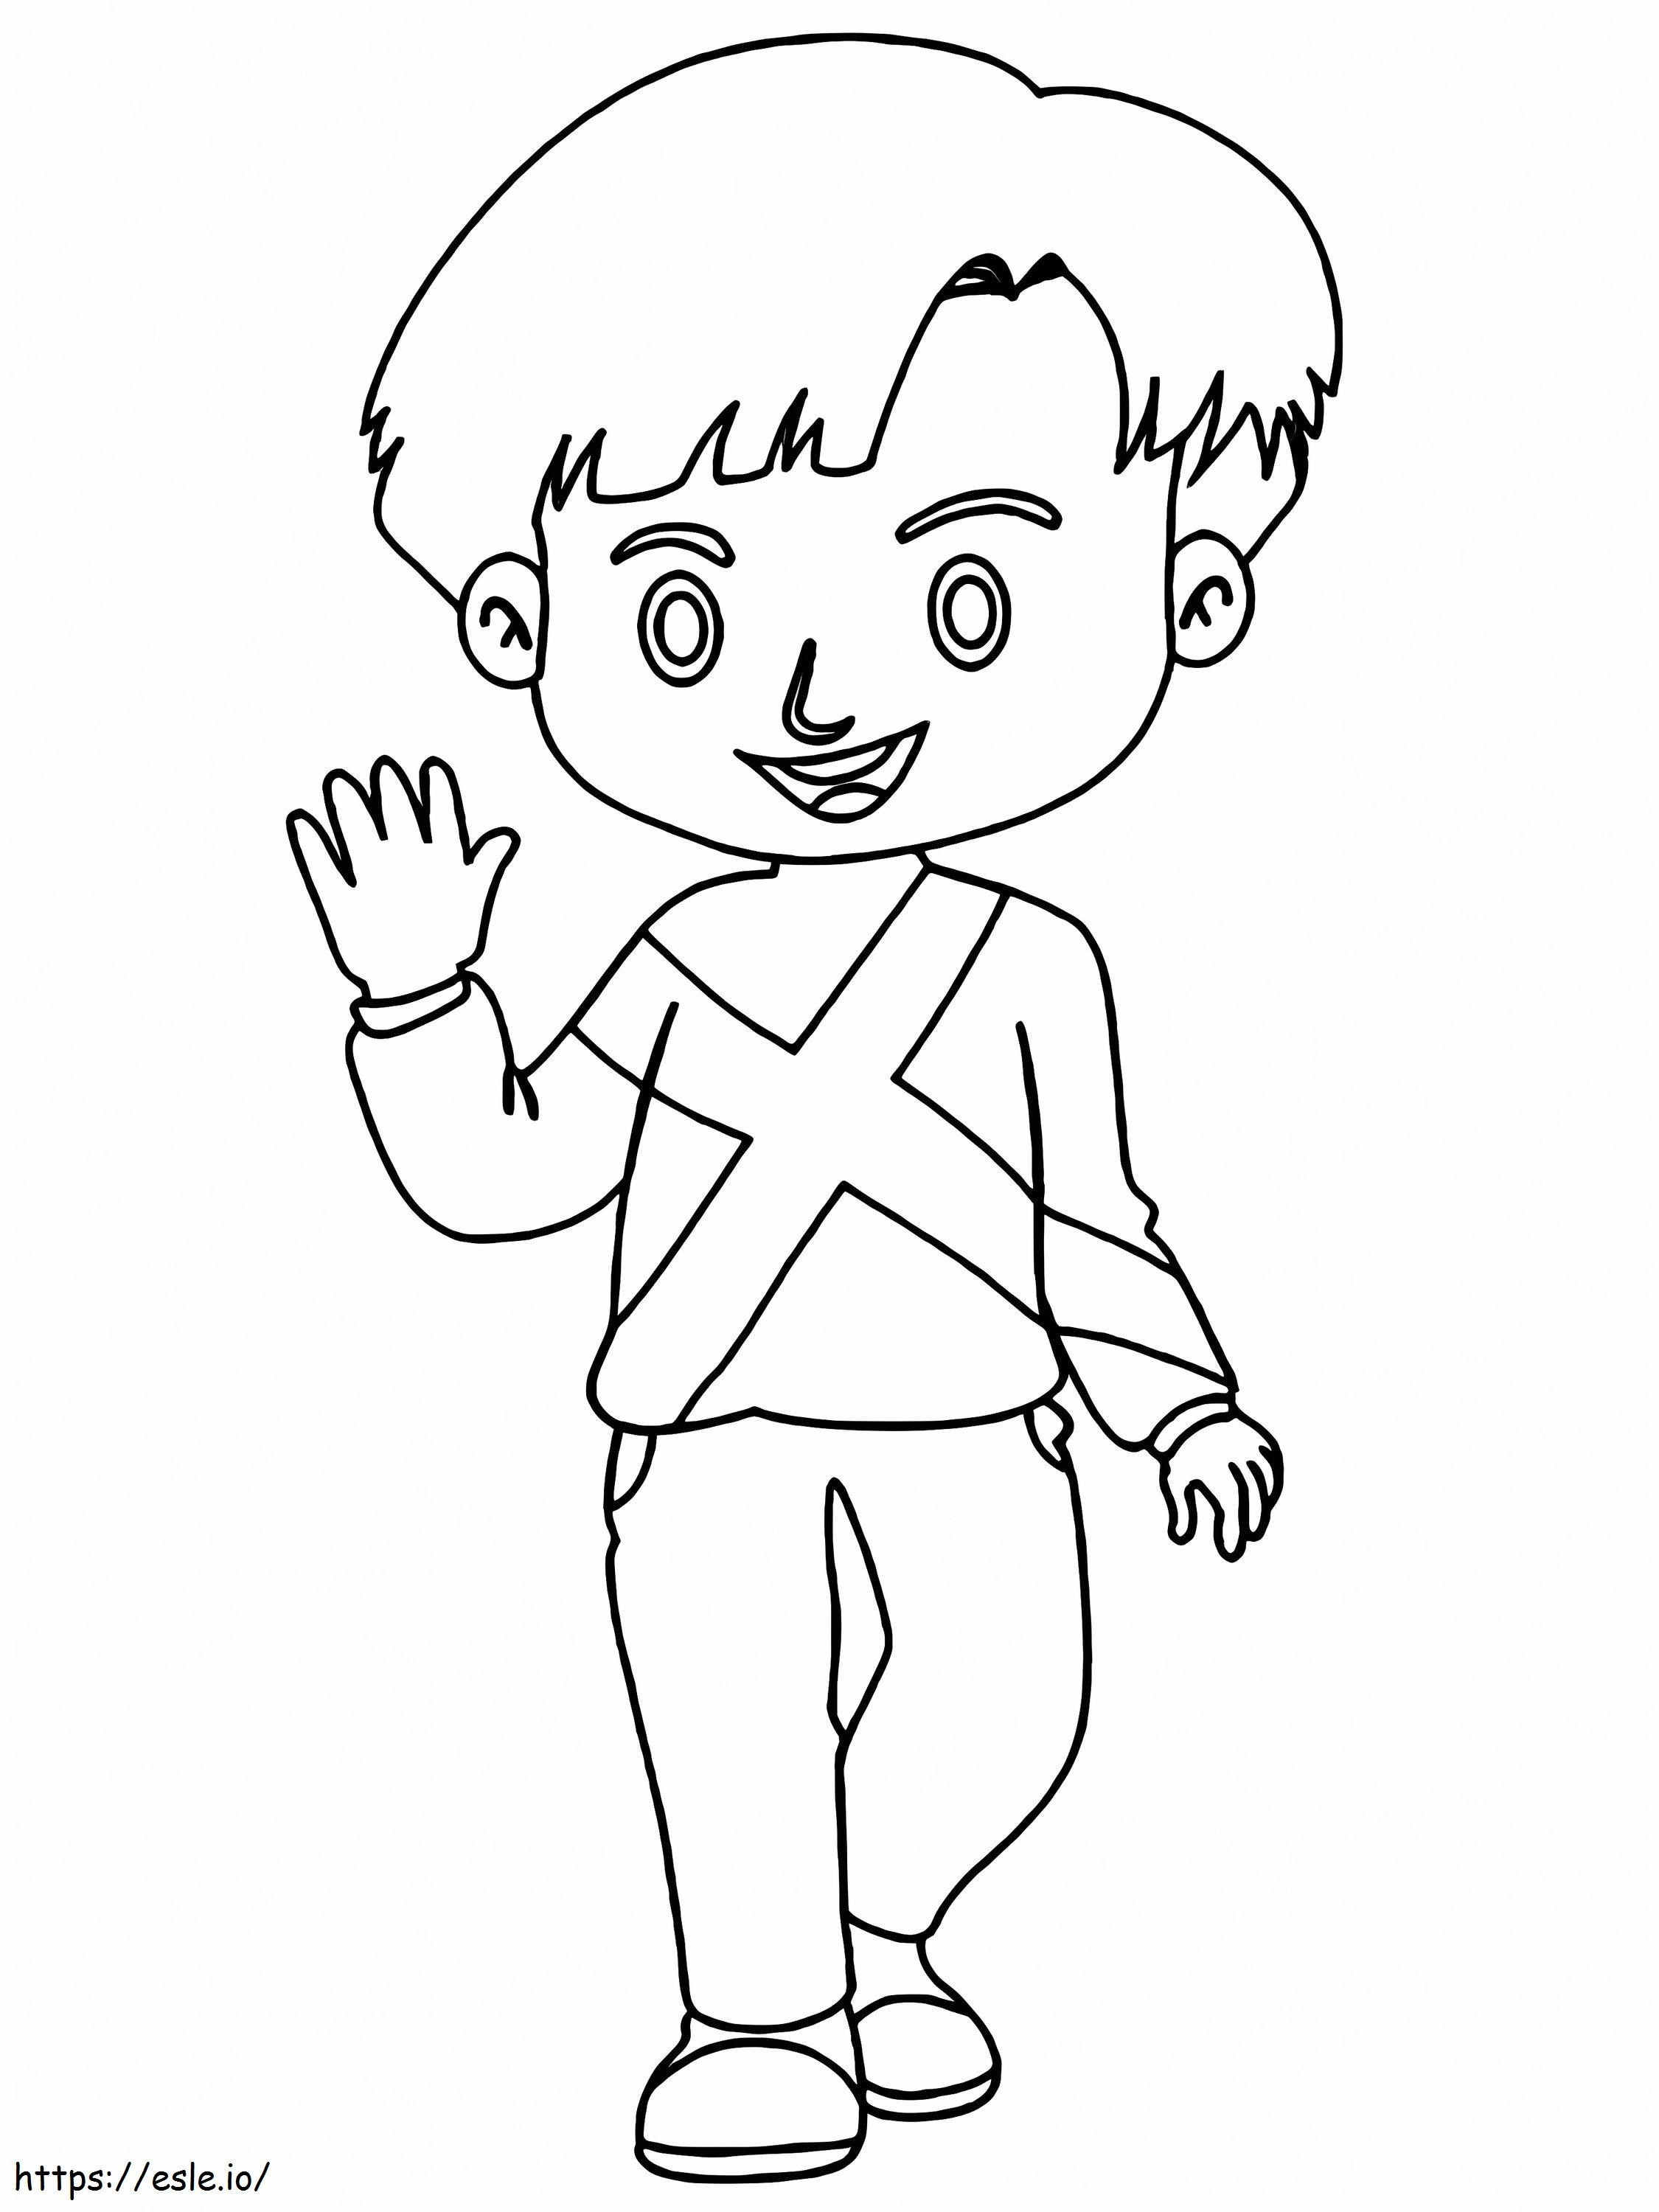 Finnish Boy coloring page